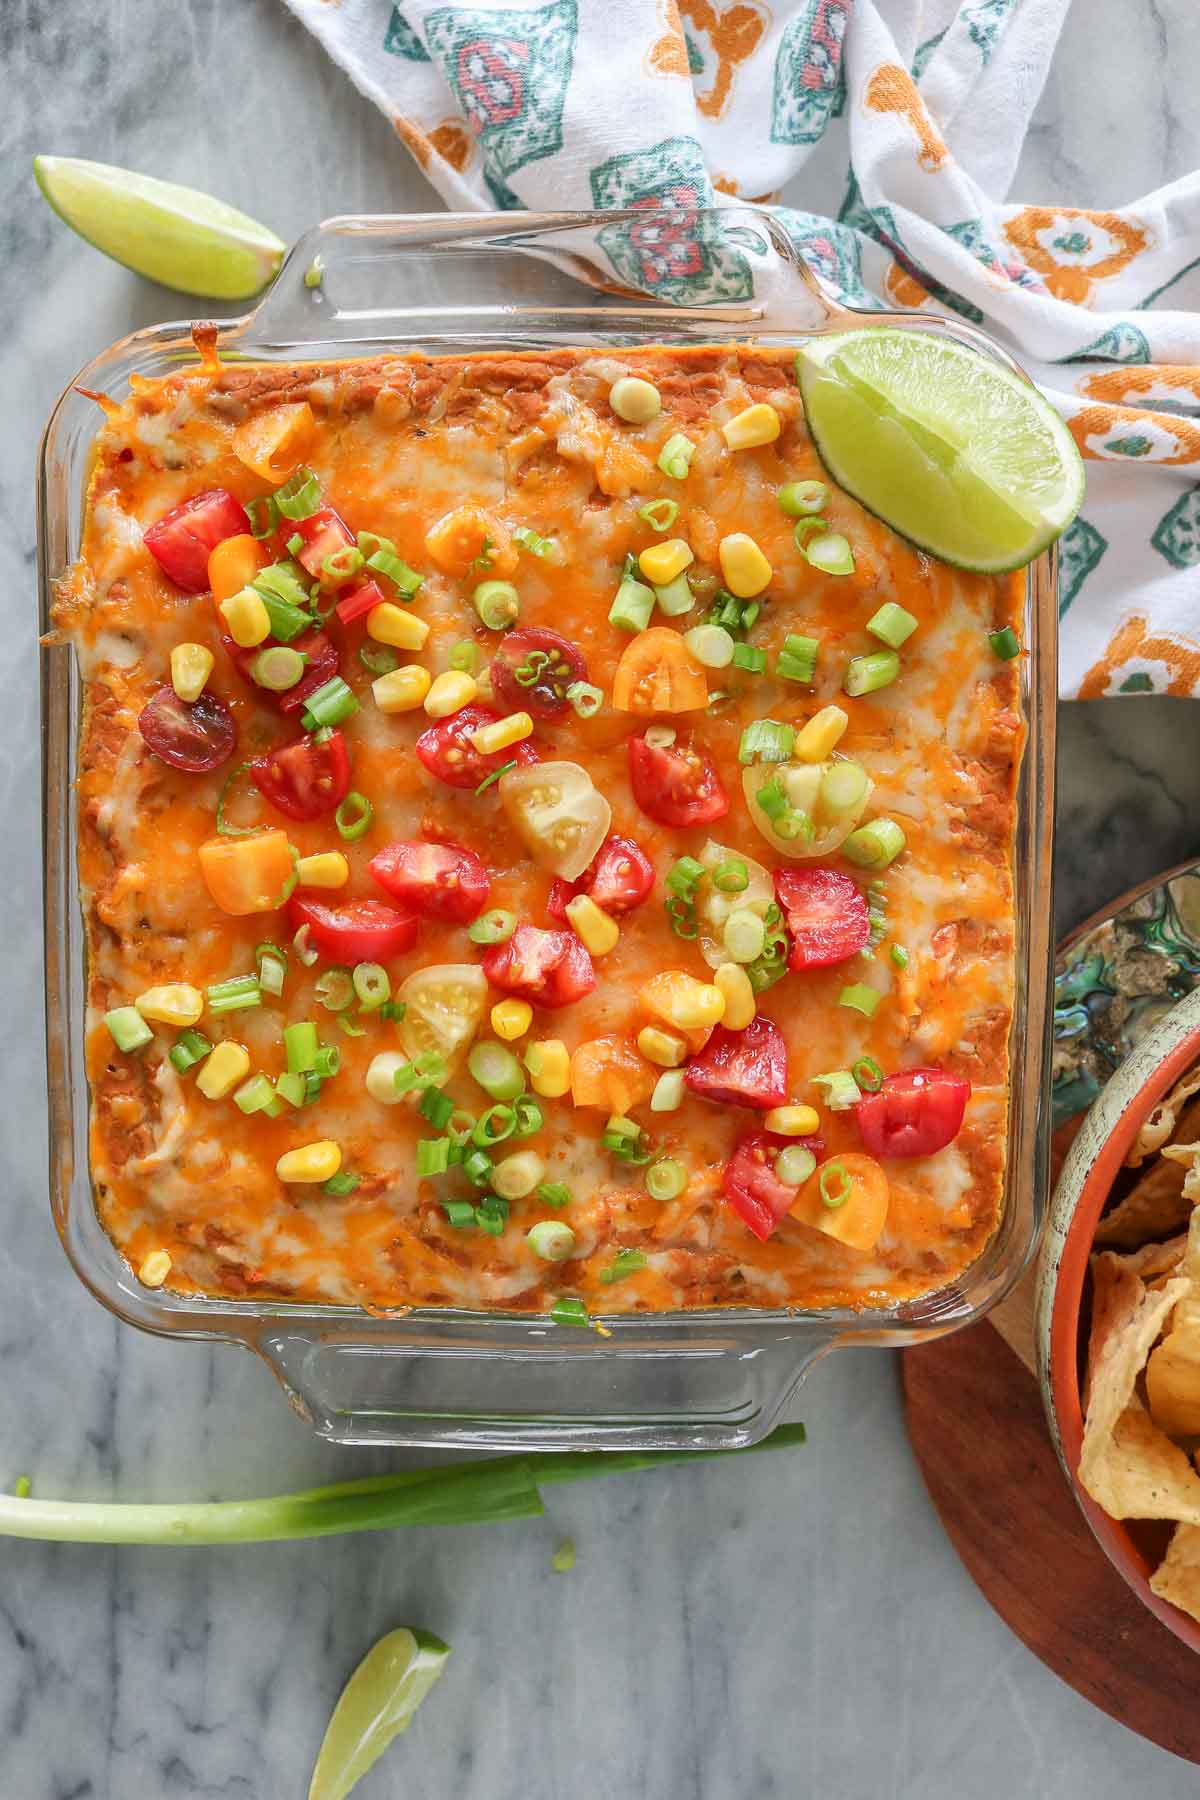 Cheesy refried bean dip in a baking dish with toppings alongside a bowl of tortilla chips.